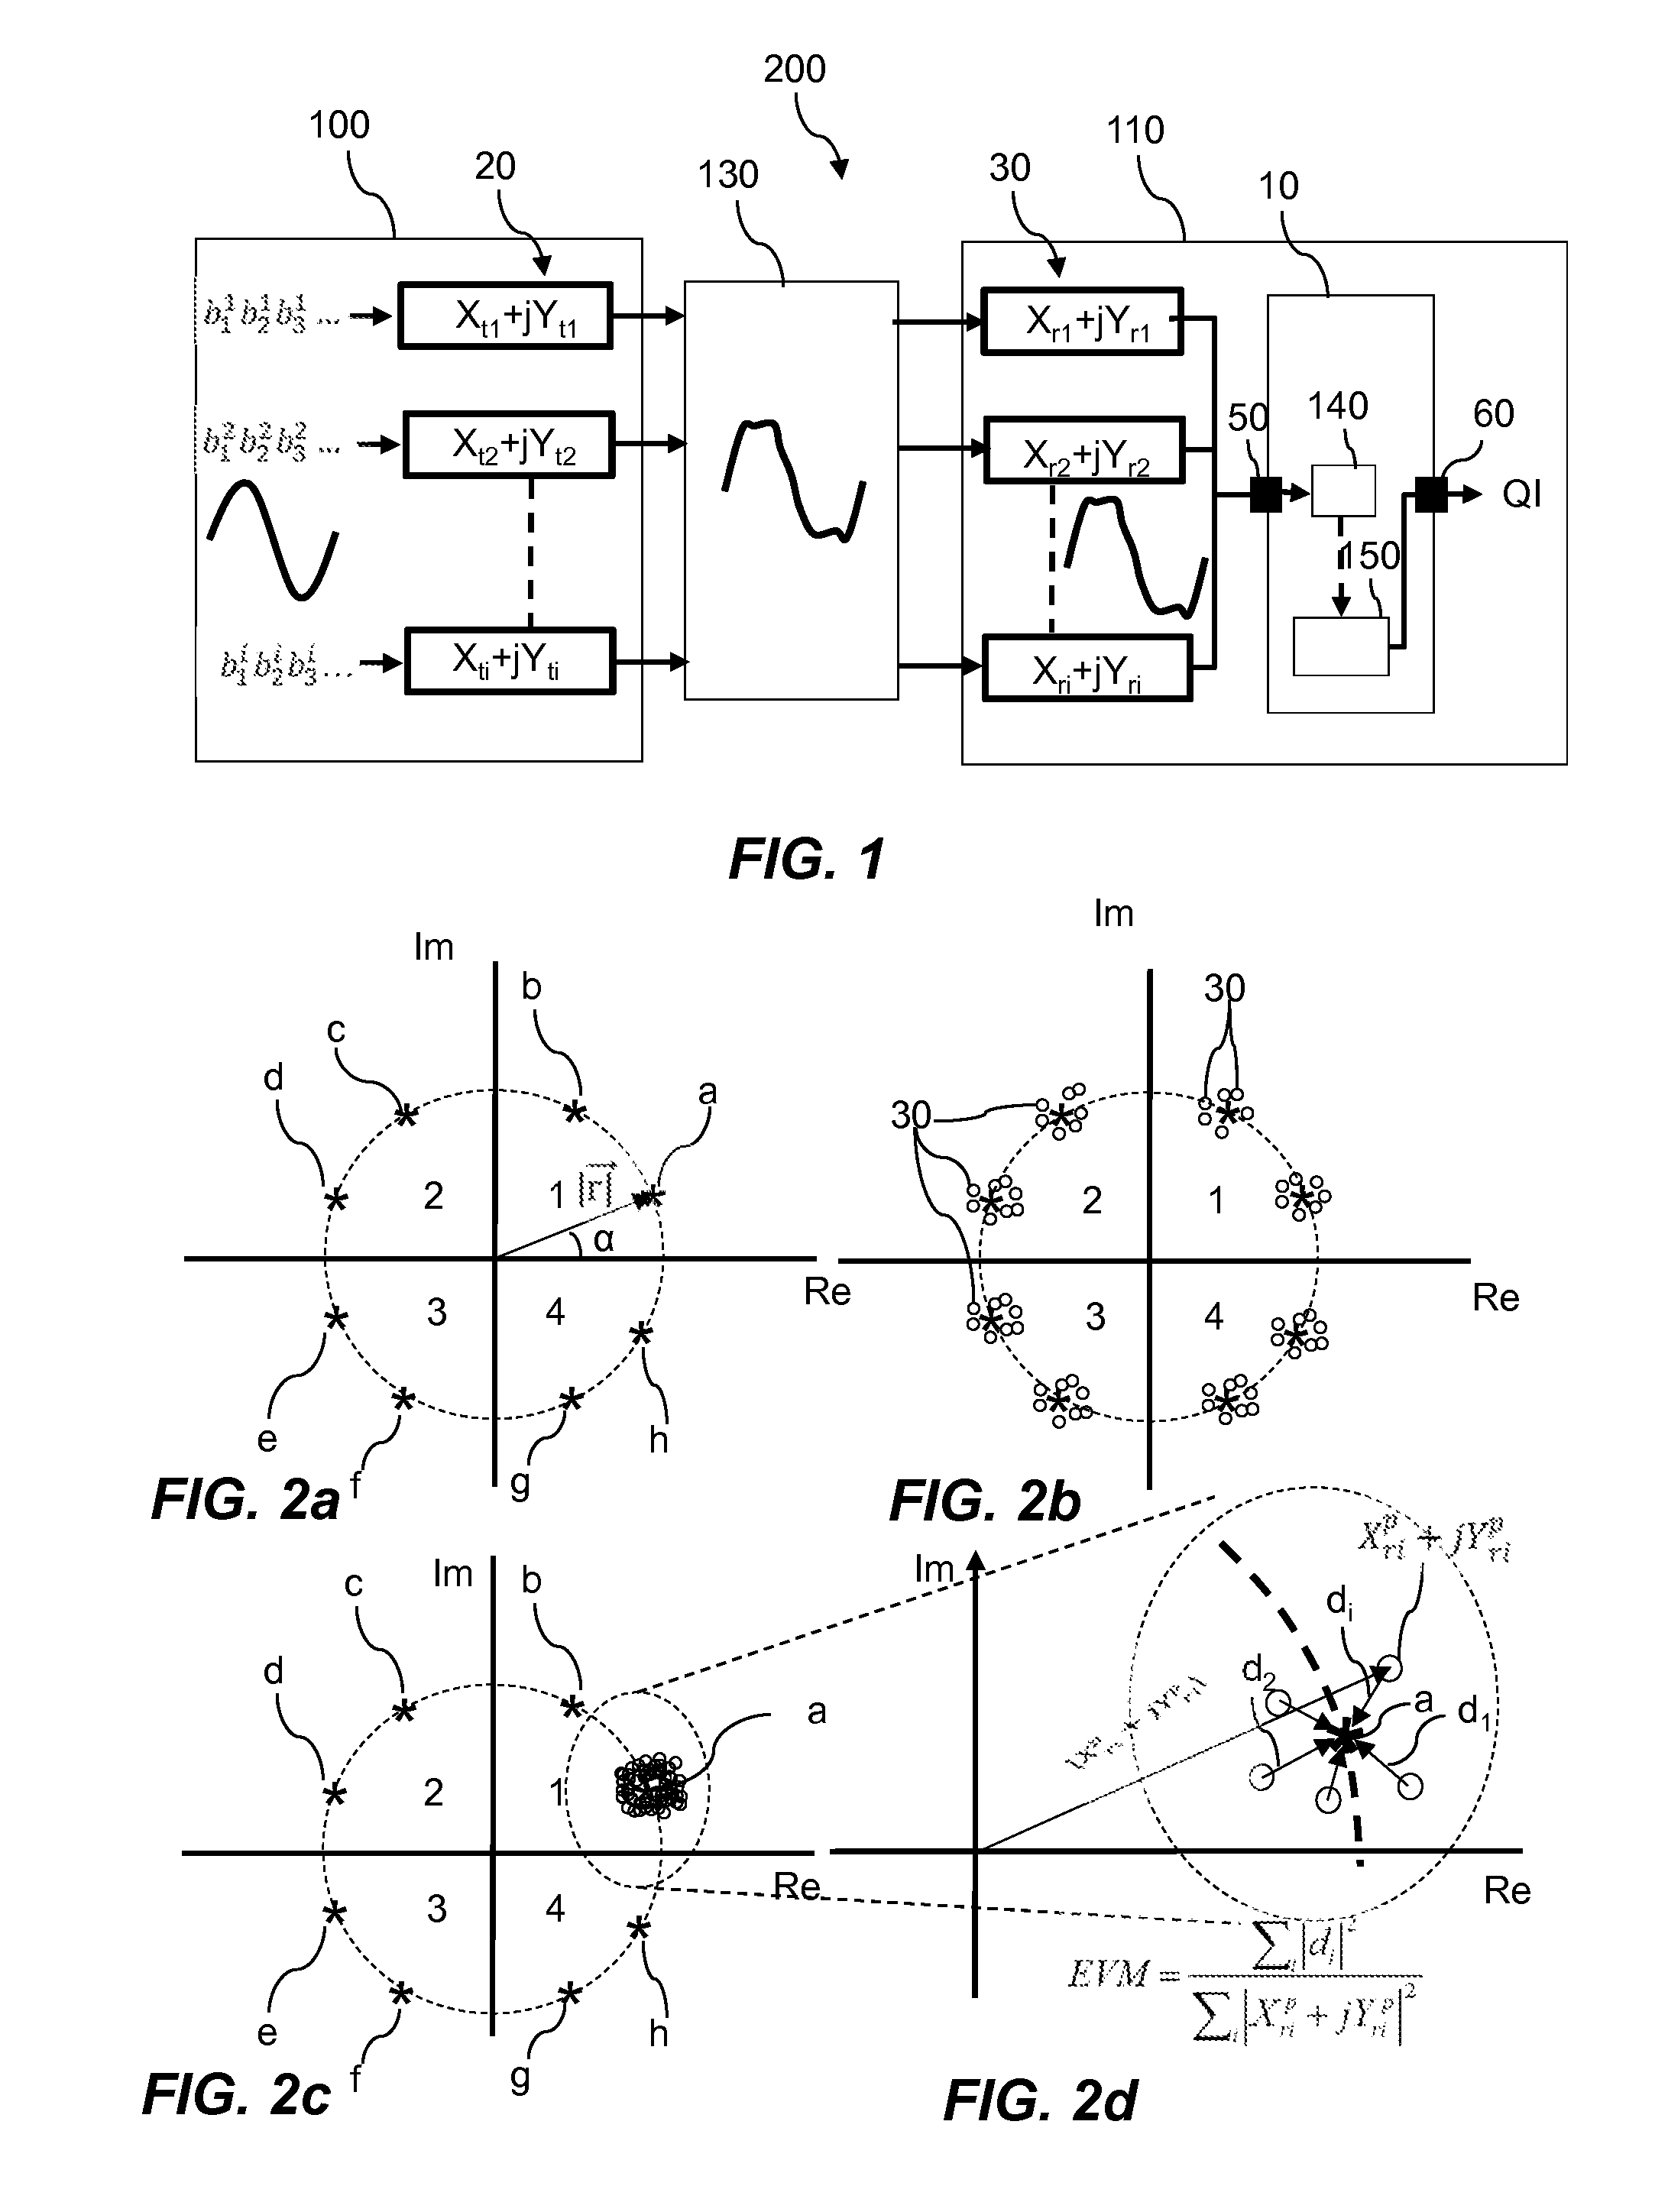 Processor unit for determining a quality indicator of a communication channel and a method thereof